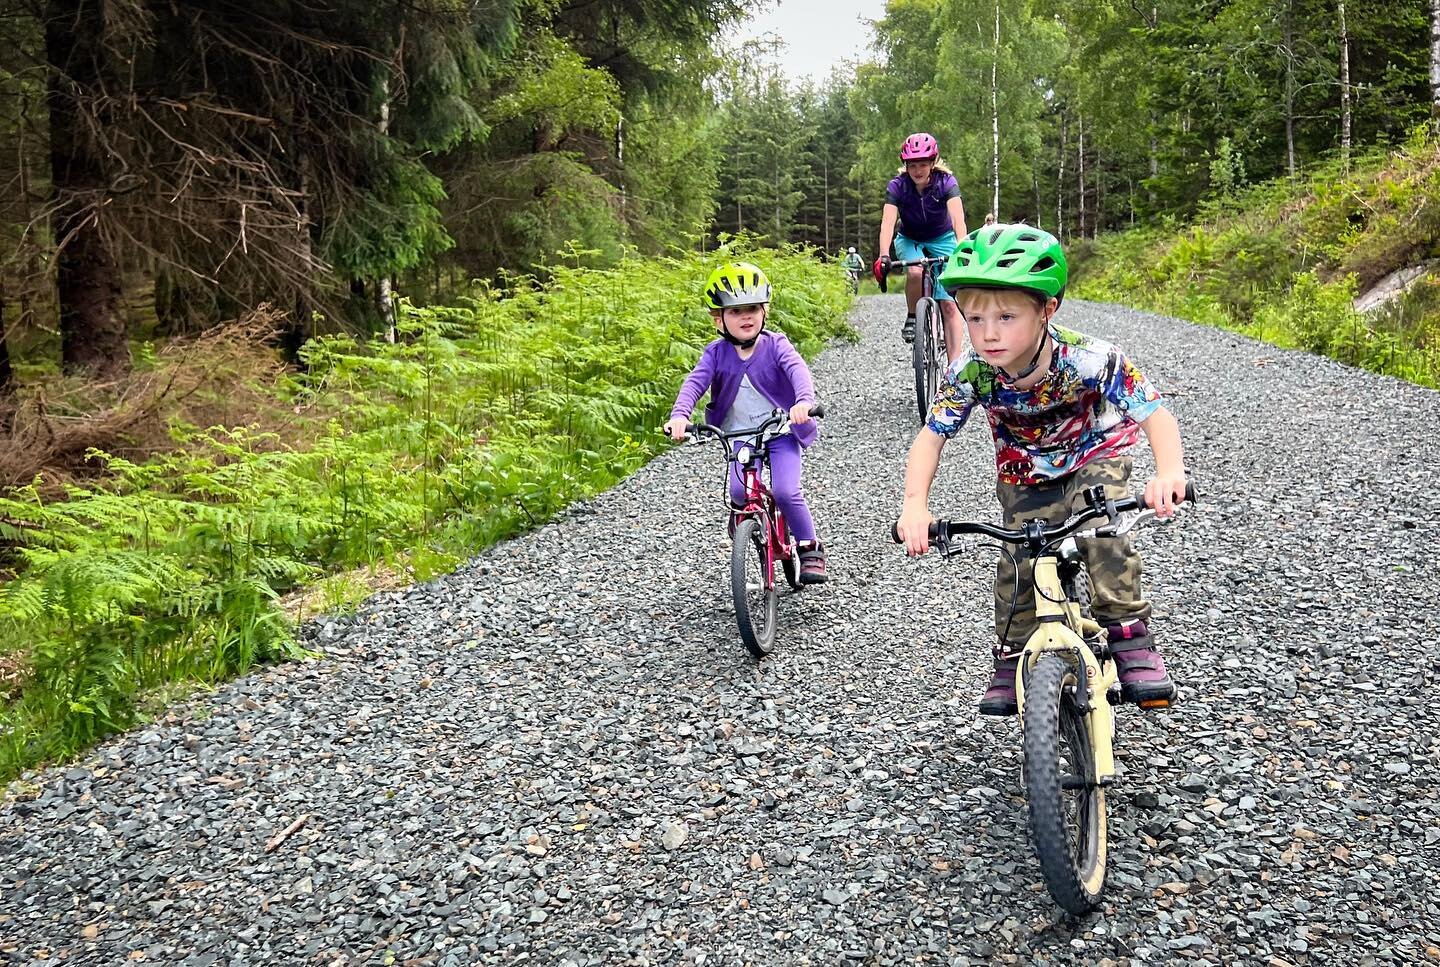 The biggest highlights for us of the new waymarked routes is seeing so many families out riding and exploring the forest. 

We love hearing all the stories and feedback so keep tagging @gravelfoyle or #gravelfoyle with your posts. 💚🙌

#gravelfoyle